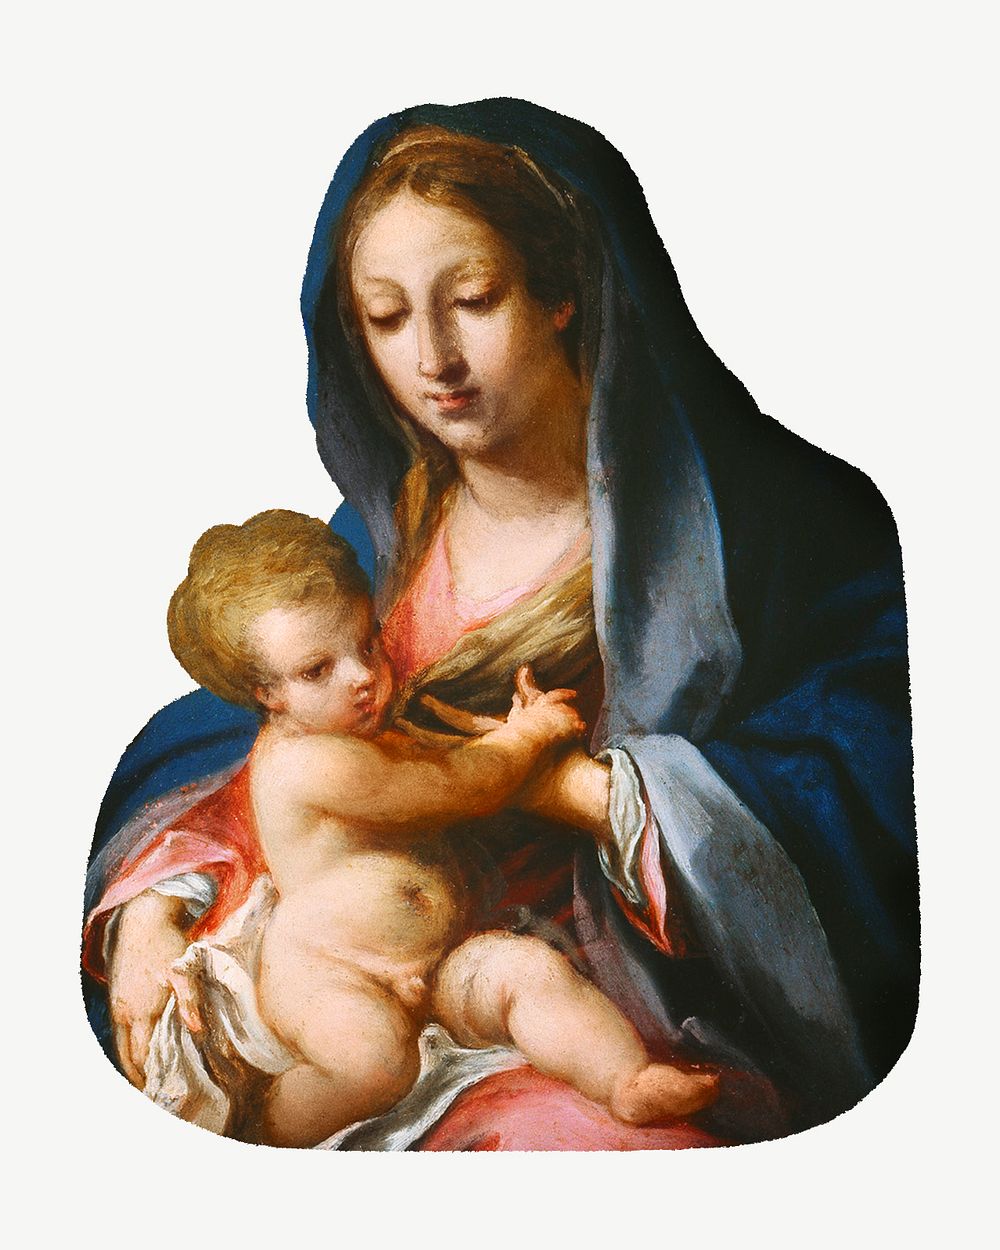 Virgin and Child, religious illustration psd by Carlo Maratti (follower). Remixed by rawpixel.